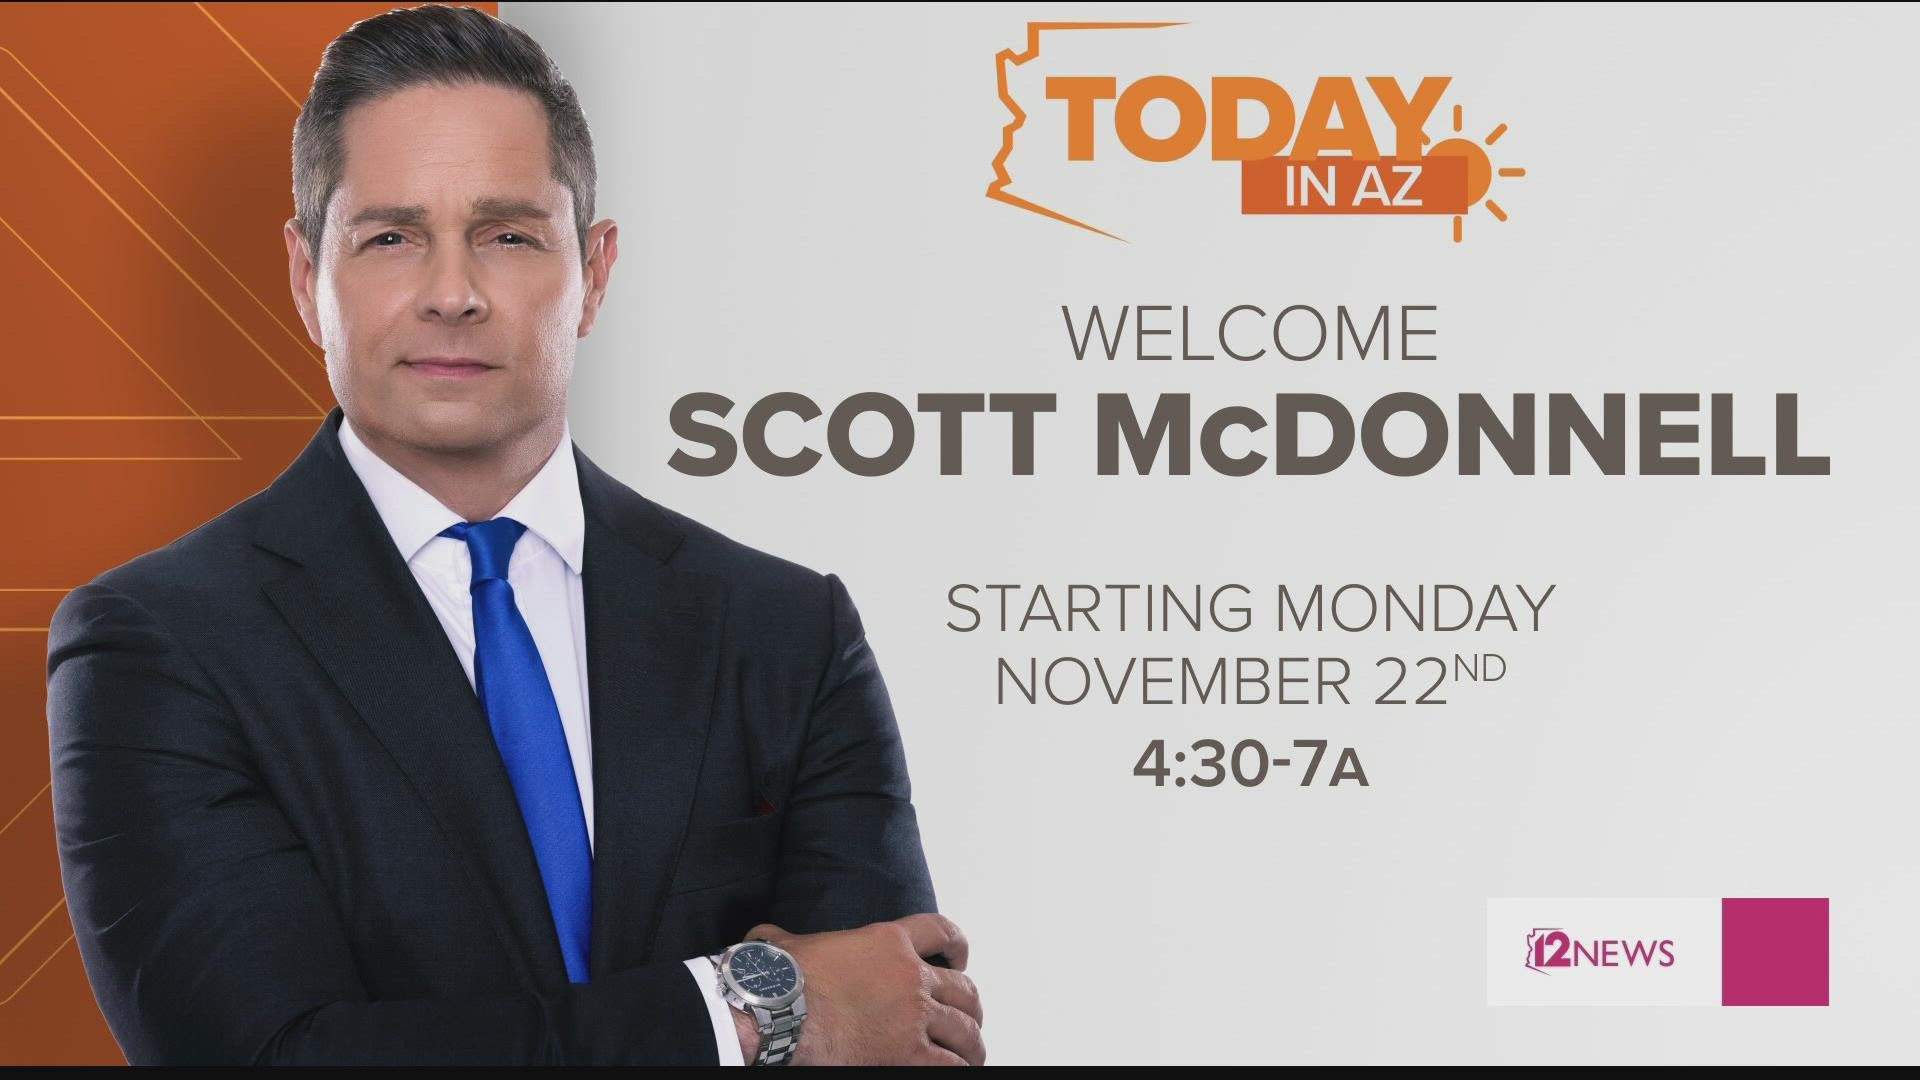 Say hello to our new morning anchor Scott McDonnell. You will see him weekdays on Today in AZ alongside Rachel McNeill.